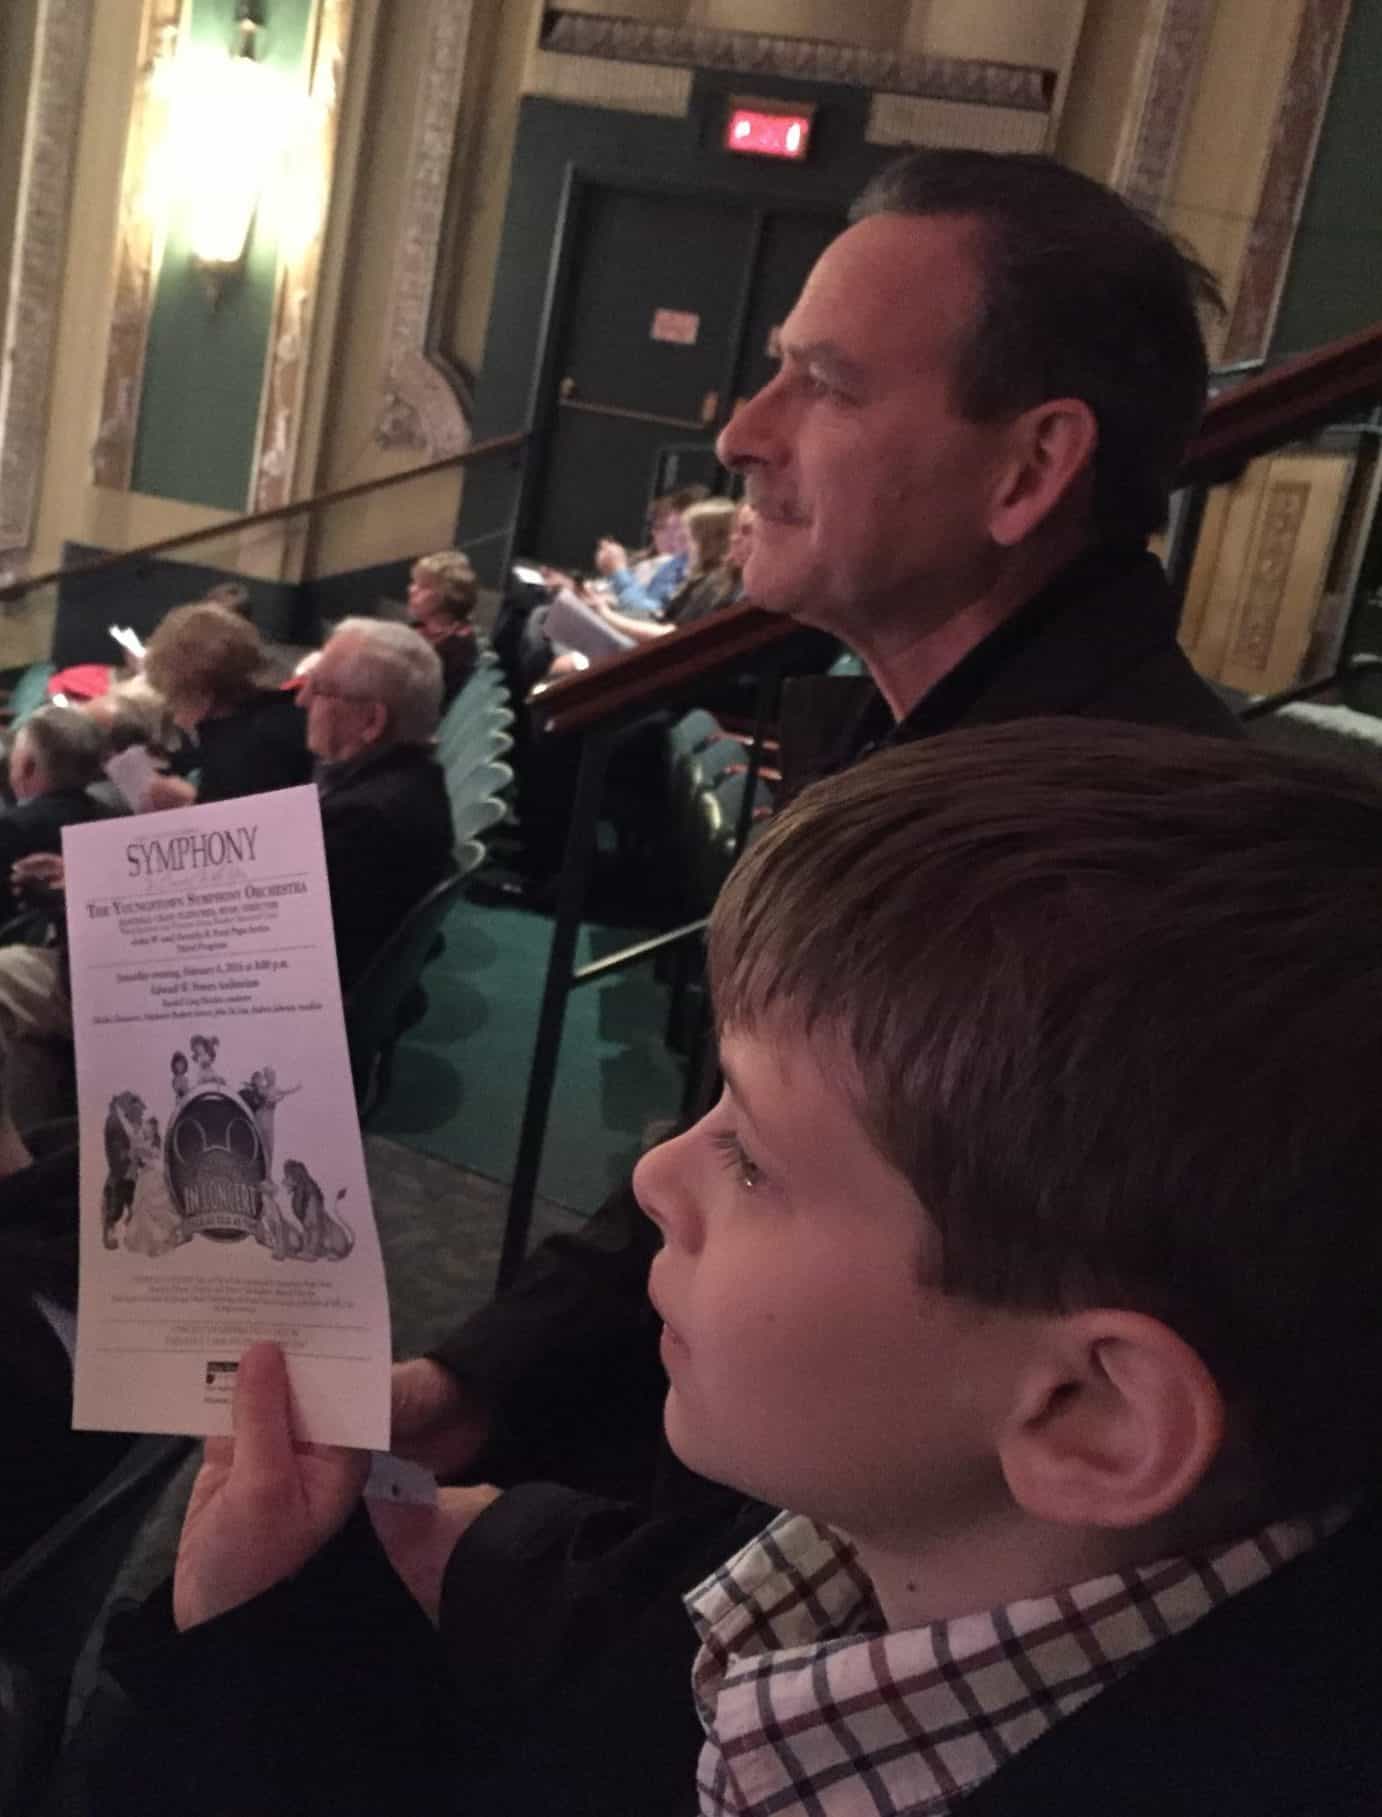 Douglas and Dad at the symphony